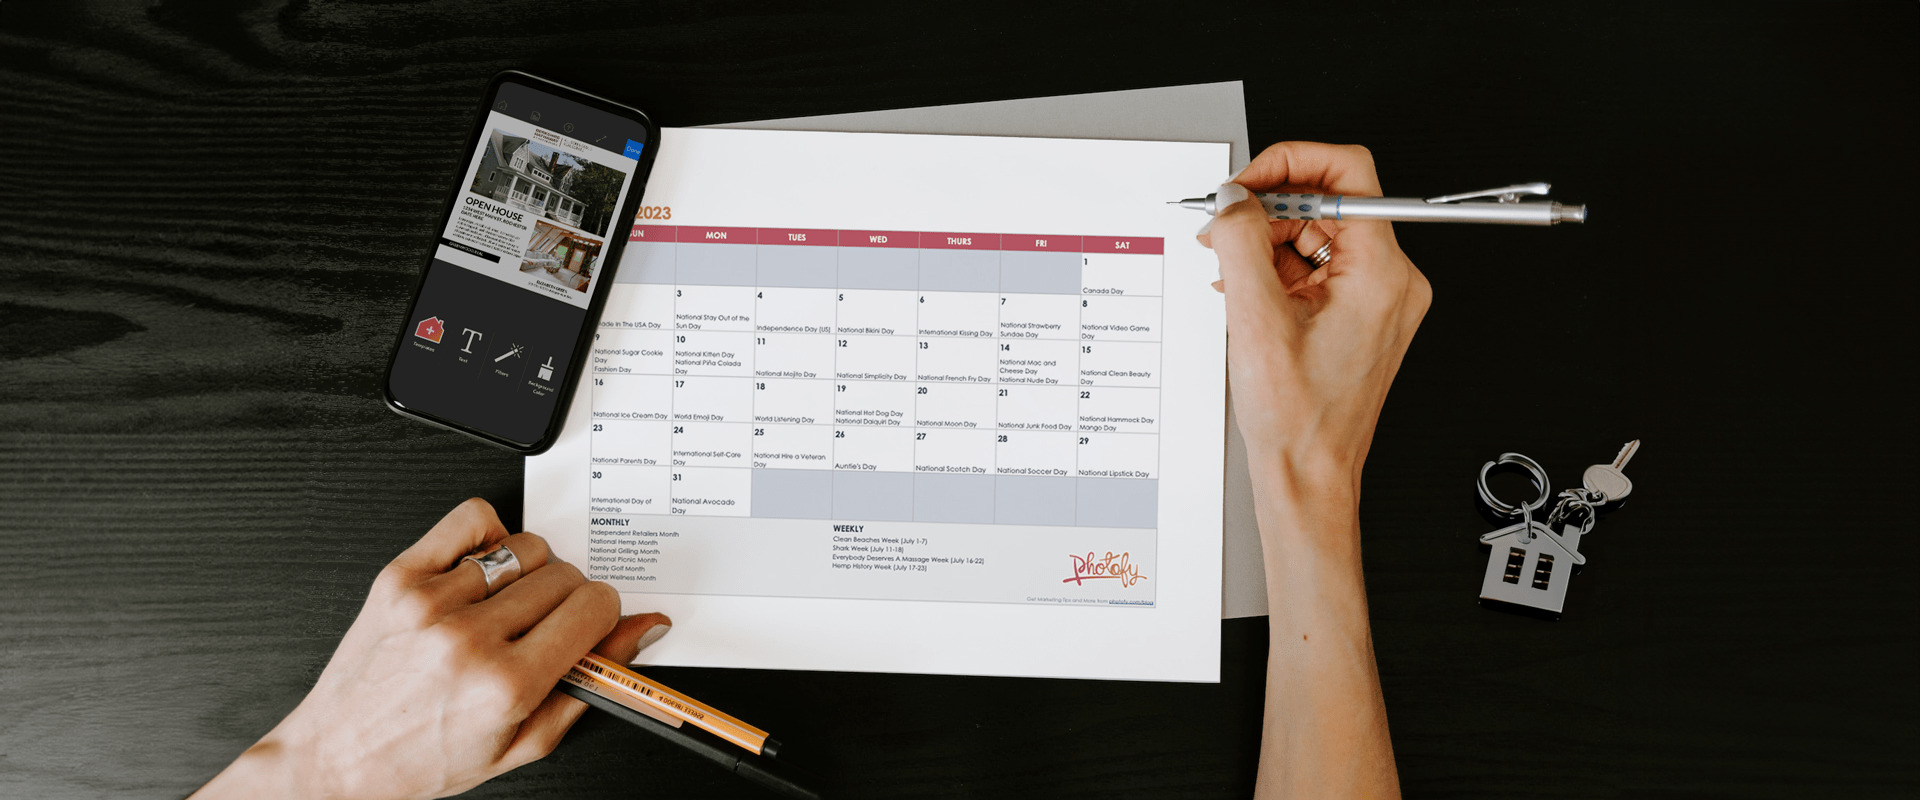 July social media holidays for real estate agents